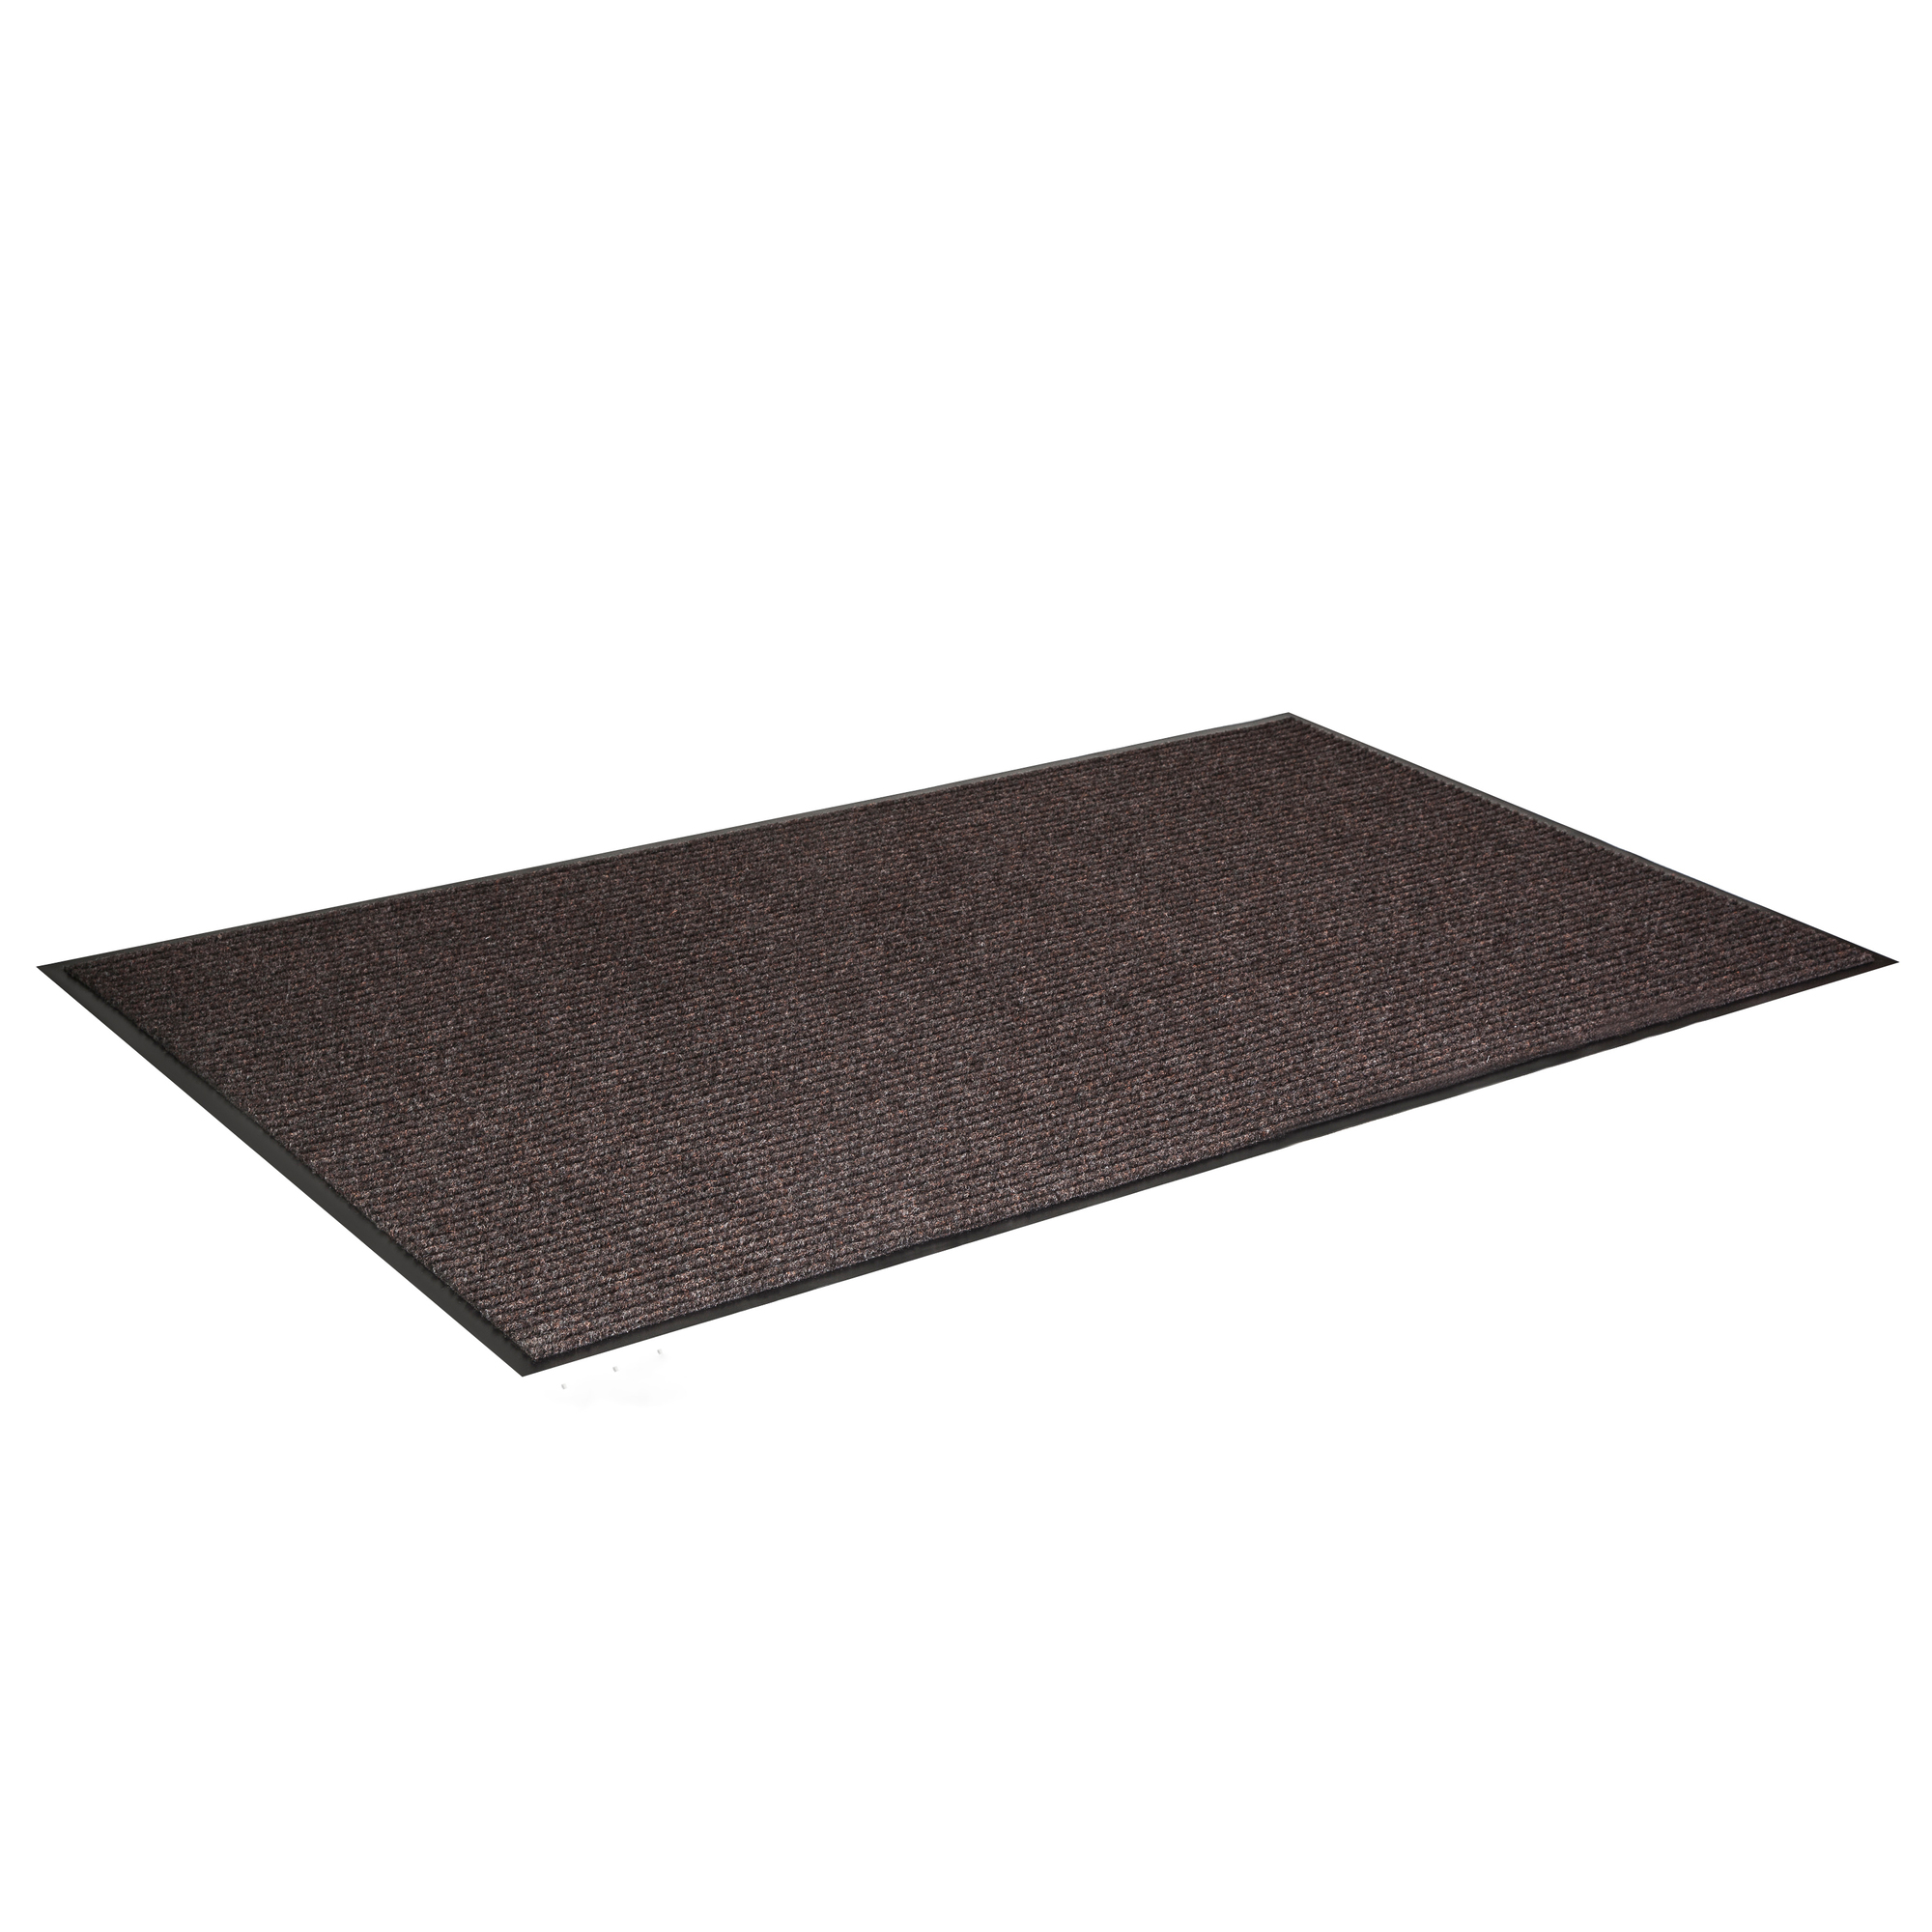 Crown Matting Technologies, Needle-Rib 3ft.x4ft. Brown, Width 36 in, Length 48 in, Thickness 5/16 in, Model NR 0034BR